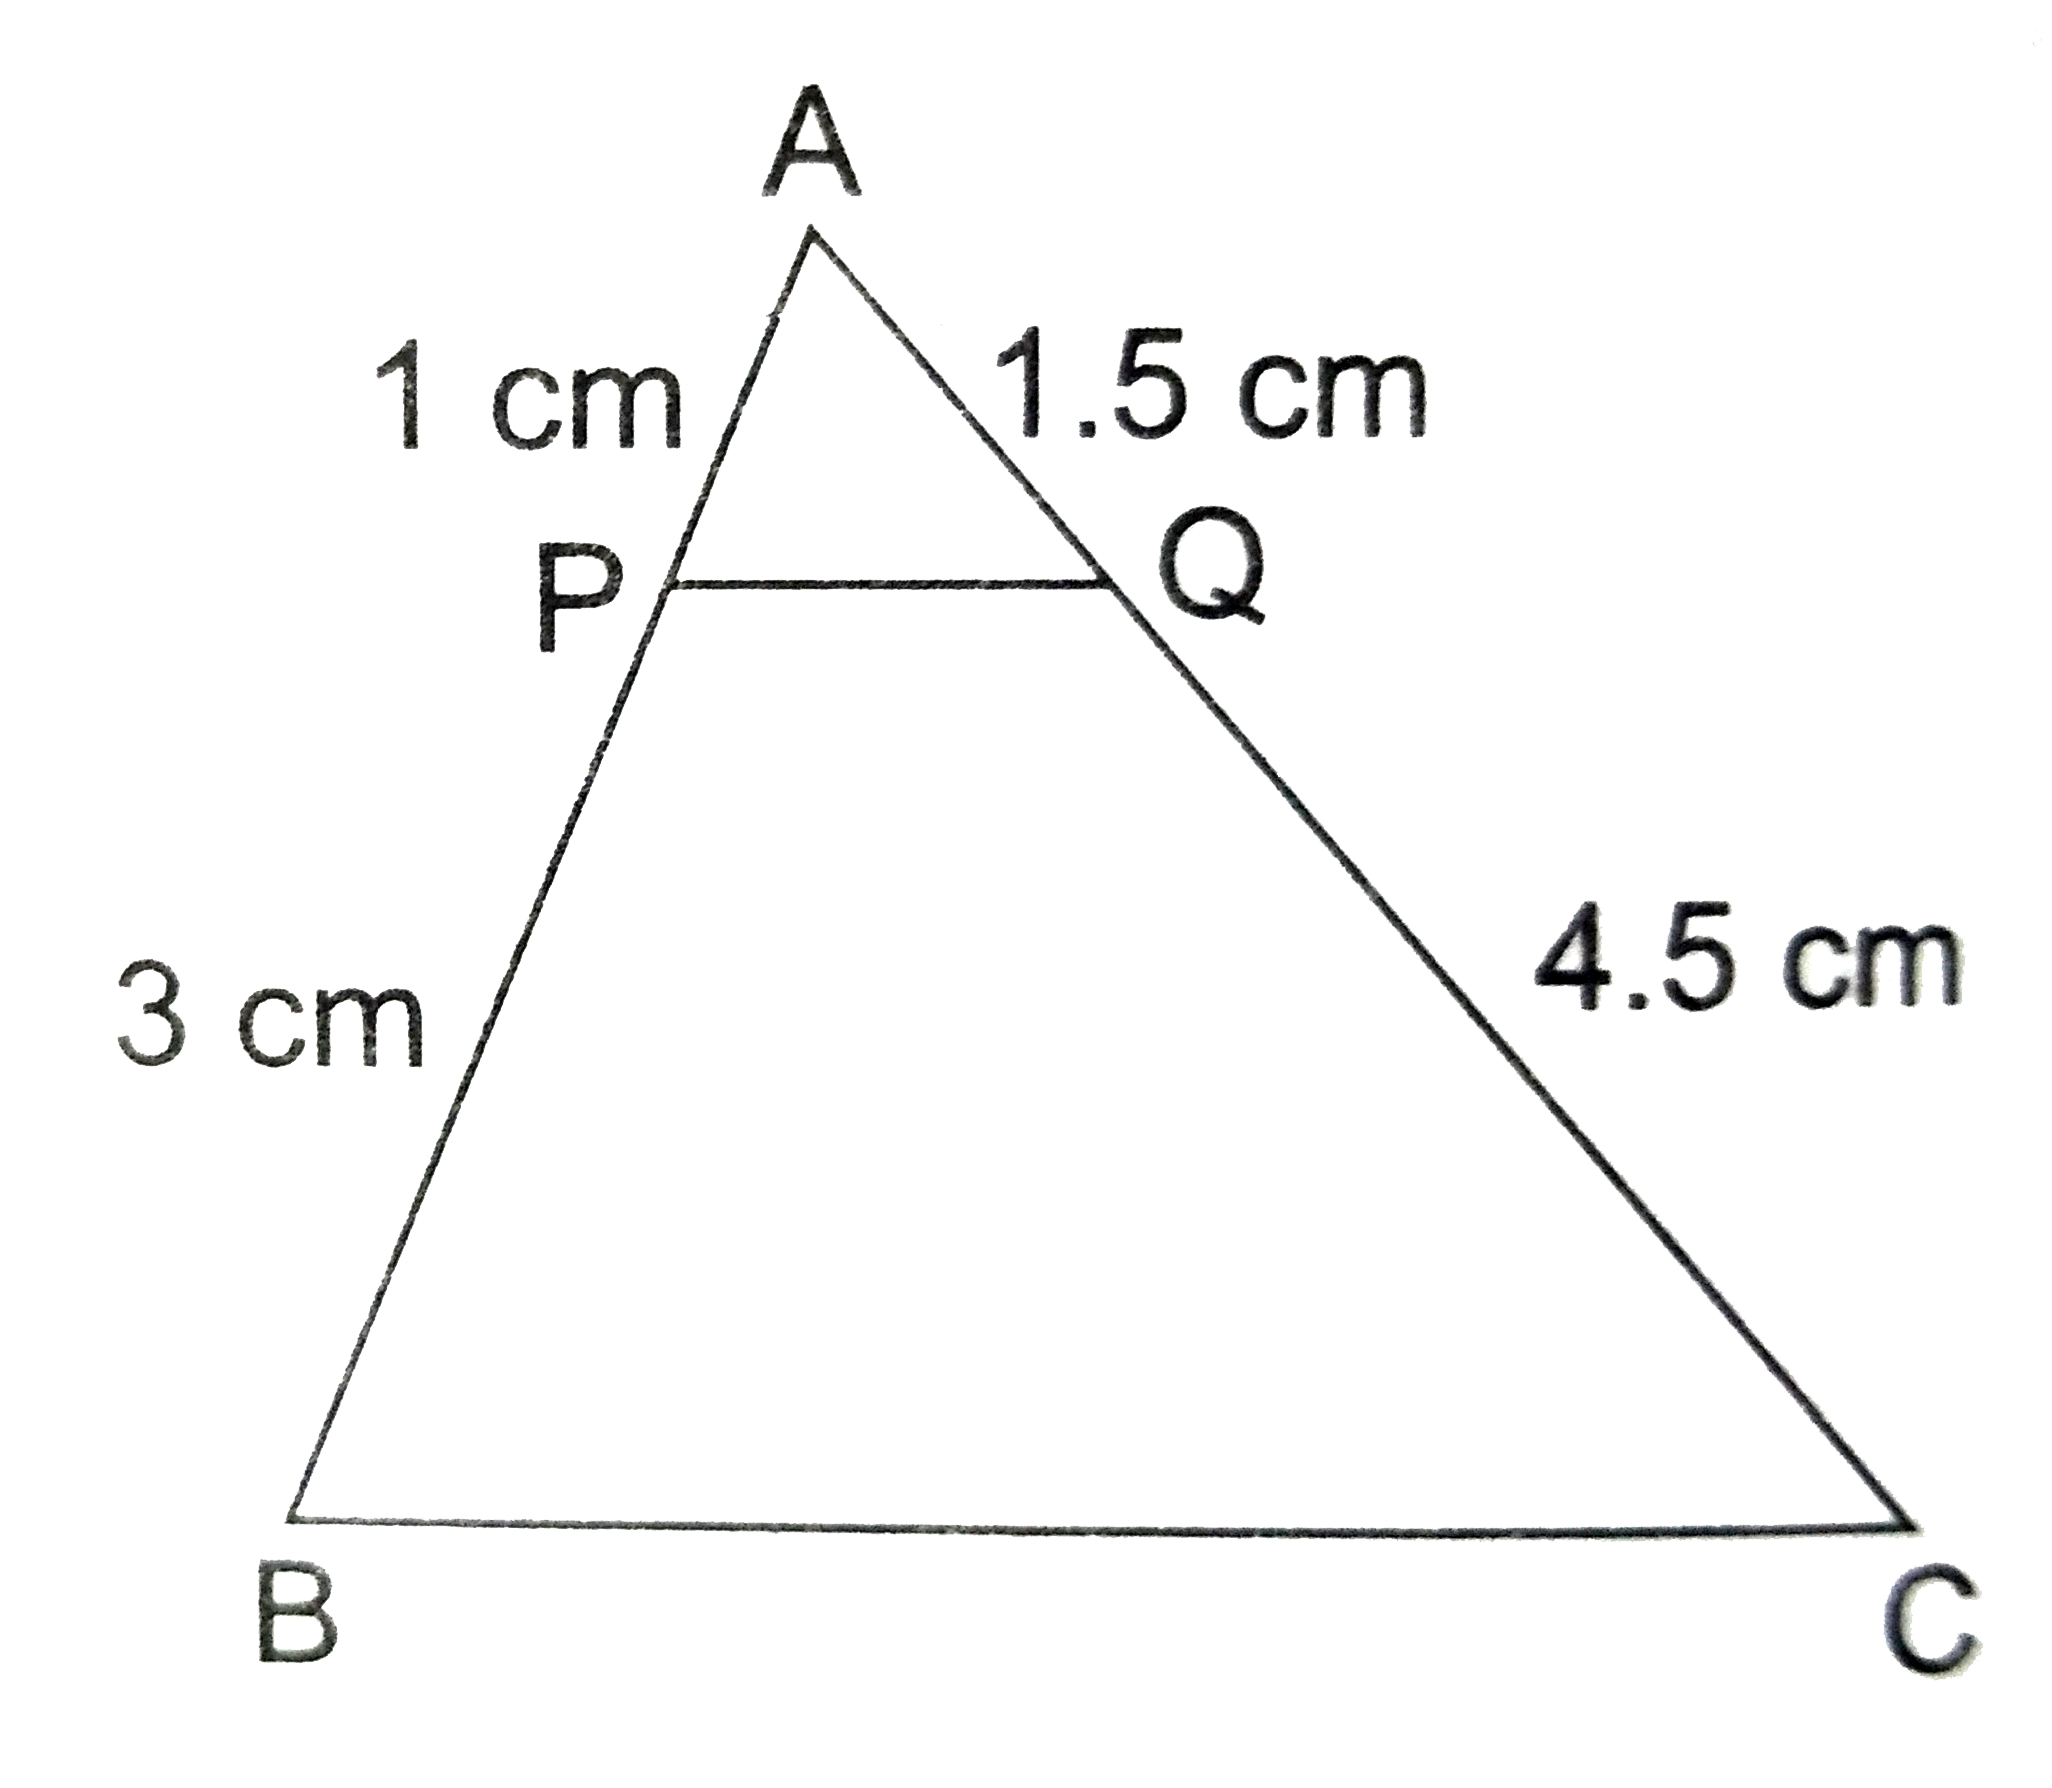 In the given figure, ABC is triangle and PQ is a stright line meeting AB in P and AC in Q. if AP=1 cm, PB=3 cm, AQ=1.5 cm, QC=4.5 cm prove that  area of Delta APQ  is  (1)/(16) of the area of Delta ABC.